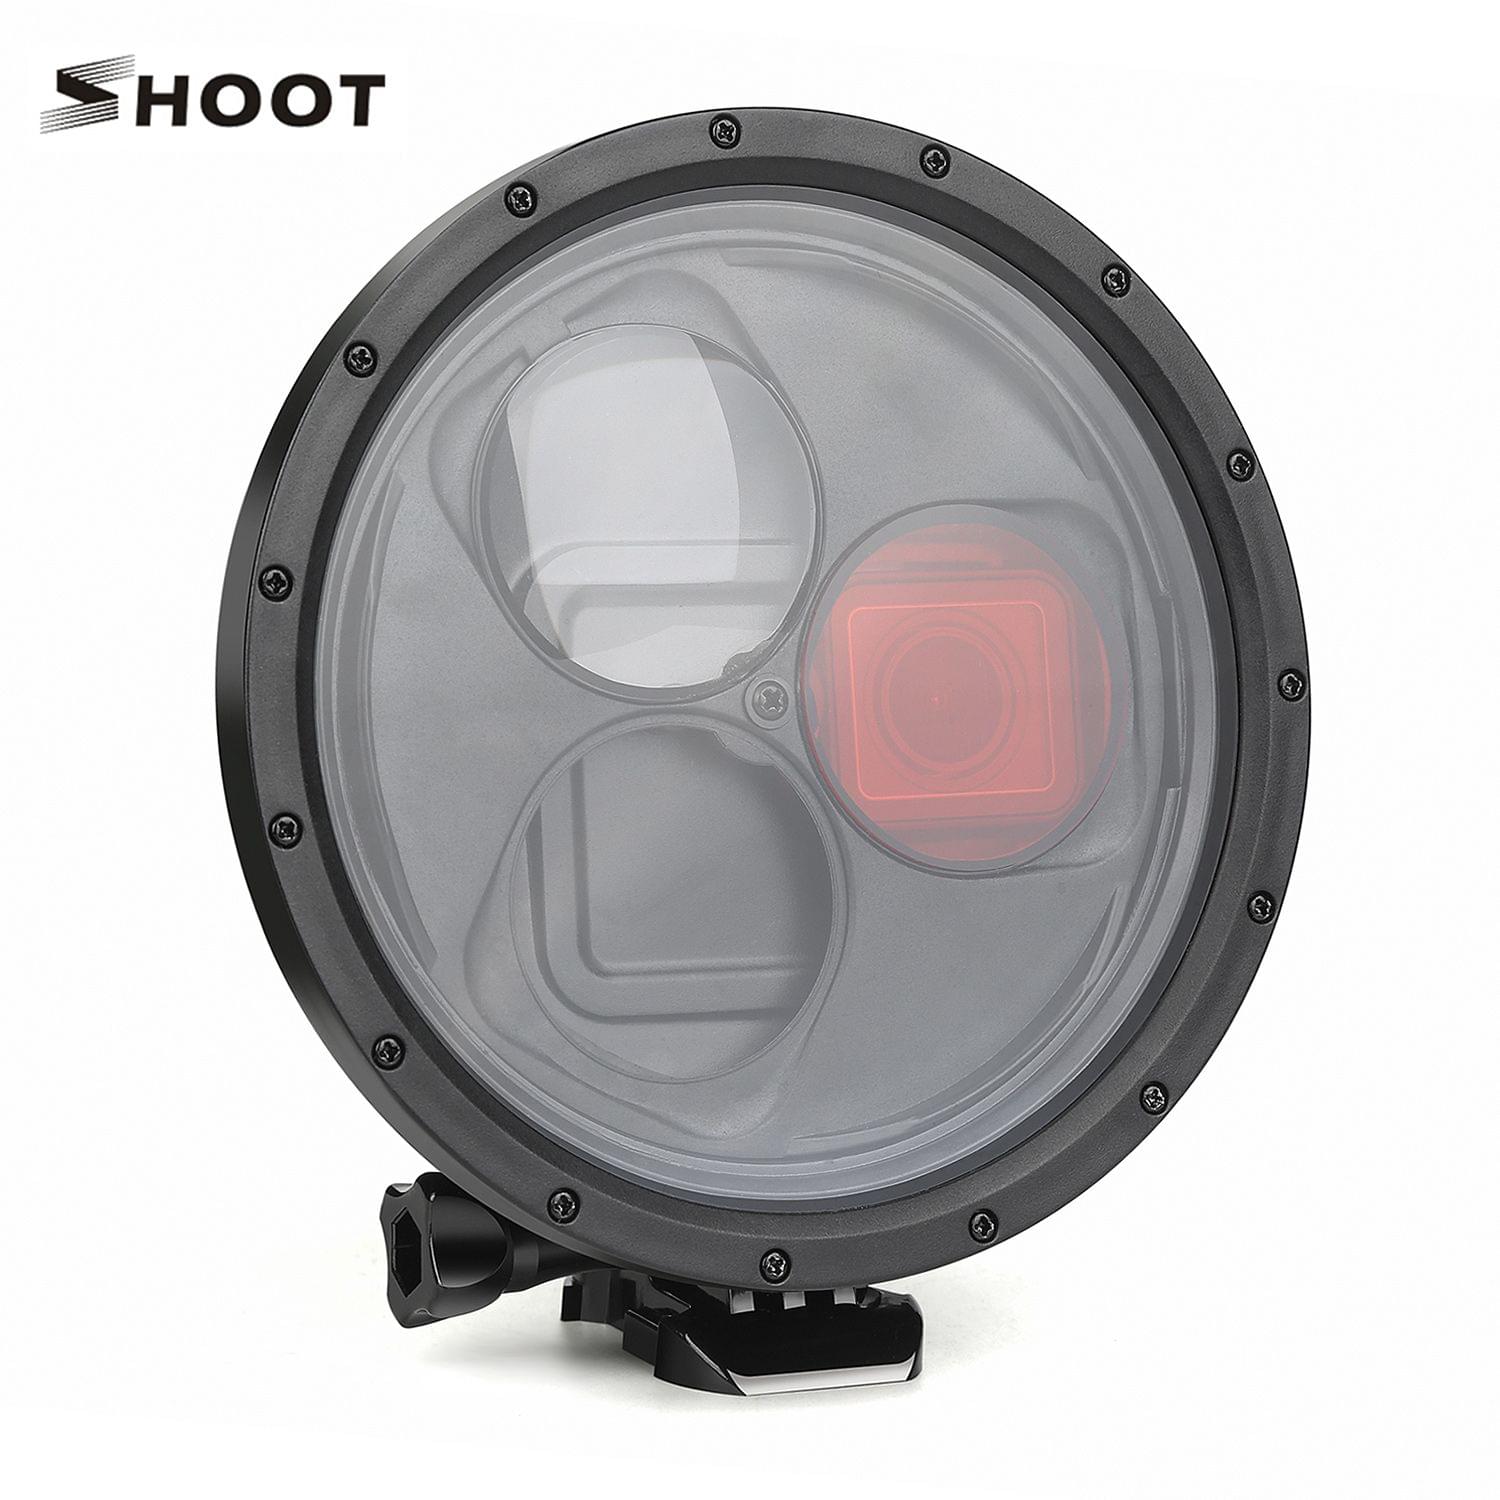 SHOOT Waterproof Dome Port Diving Housing Case with 10x